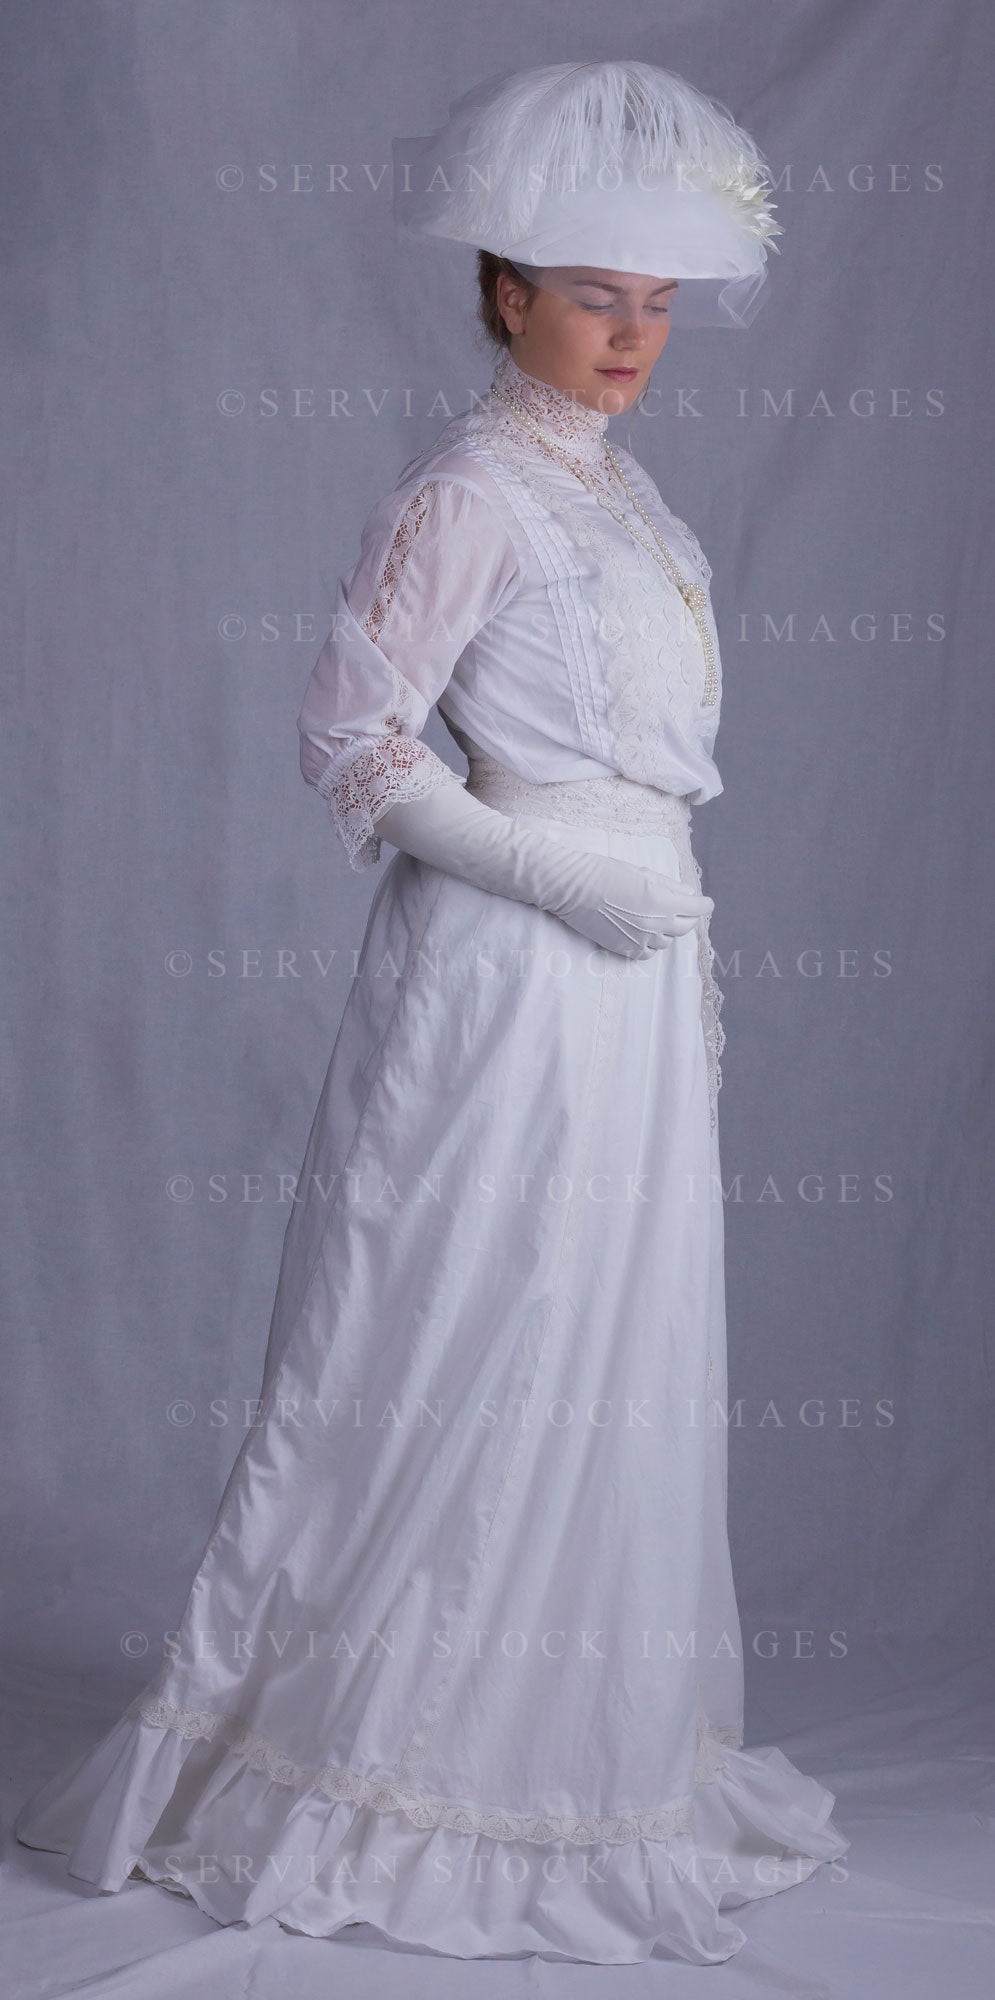 Edwardian woman in a white lace blouse and skirt with a pearl necklace (Tayla 0098)